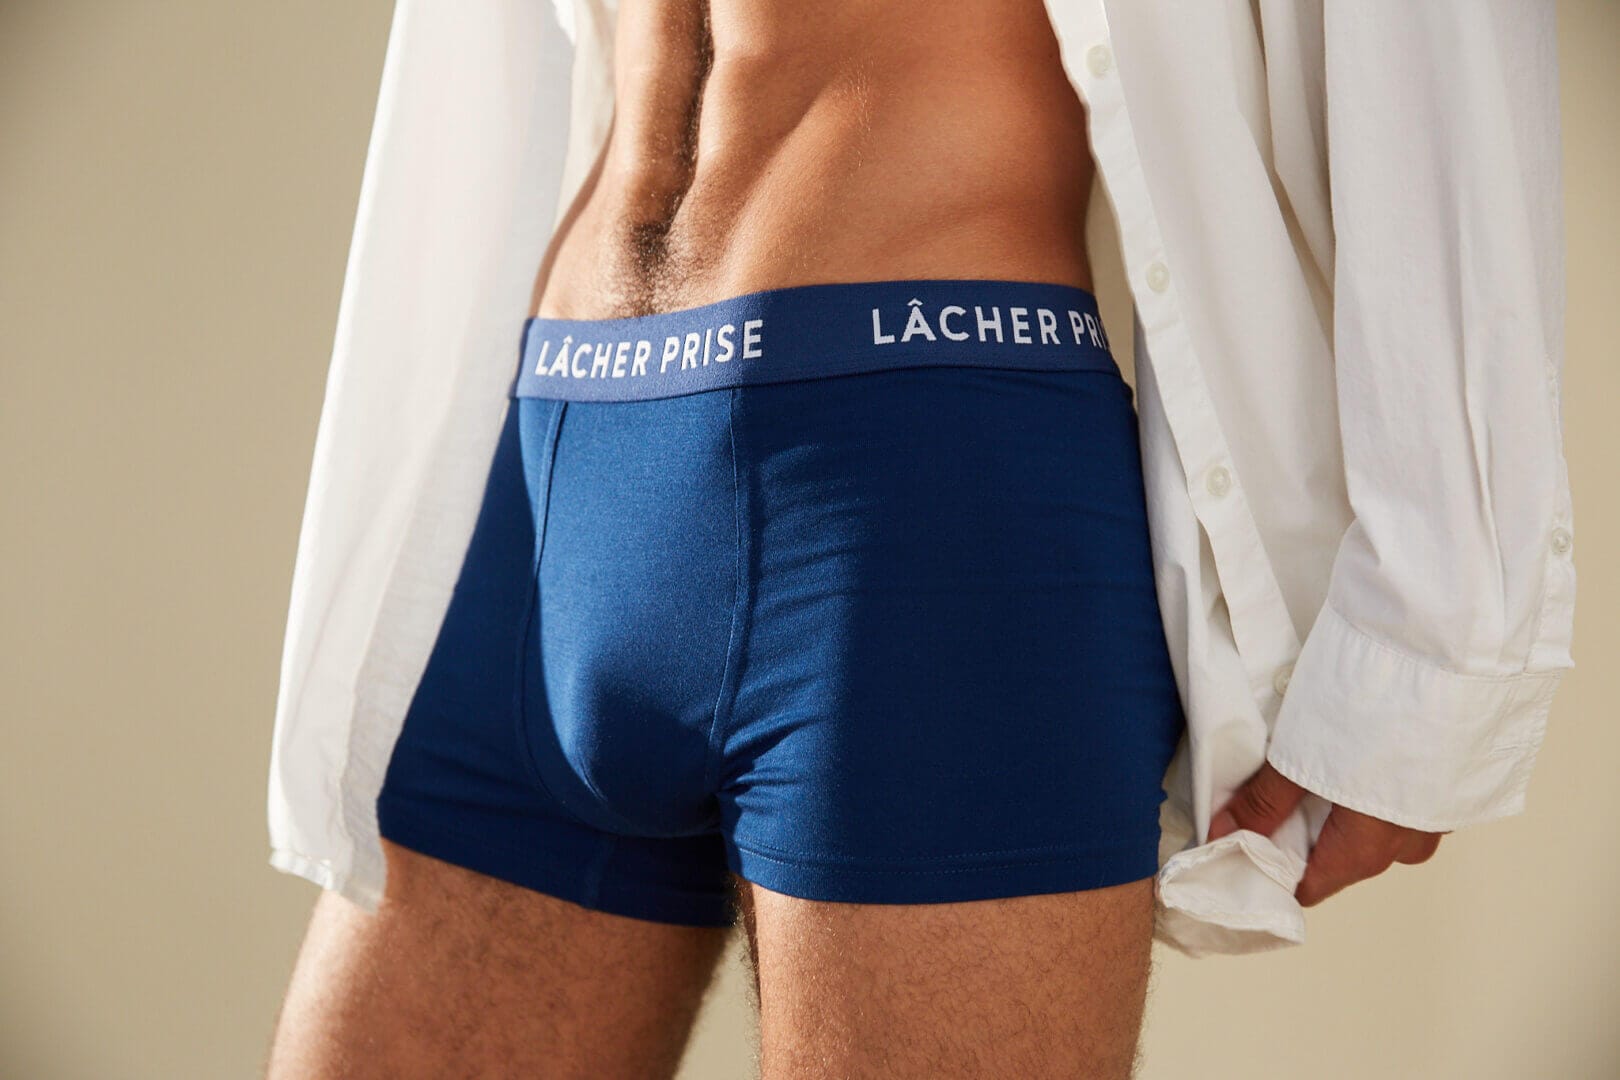 HOLIDAY GIFT GUIDE FOR MEN: THE MOST COMFORTABLE UNDERWEAR WITH